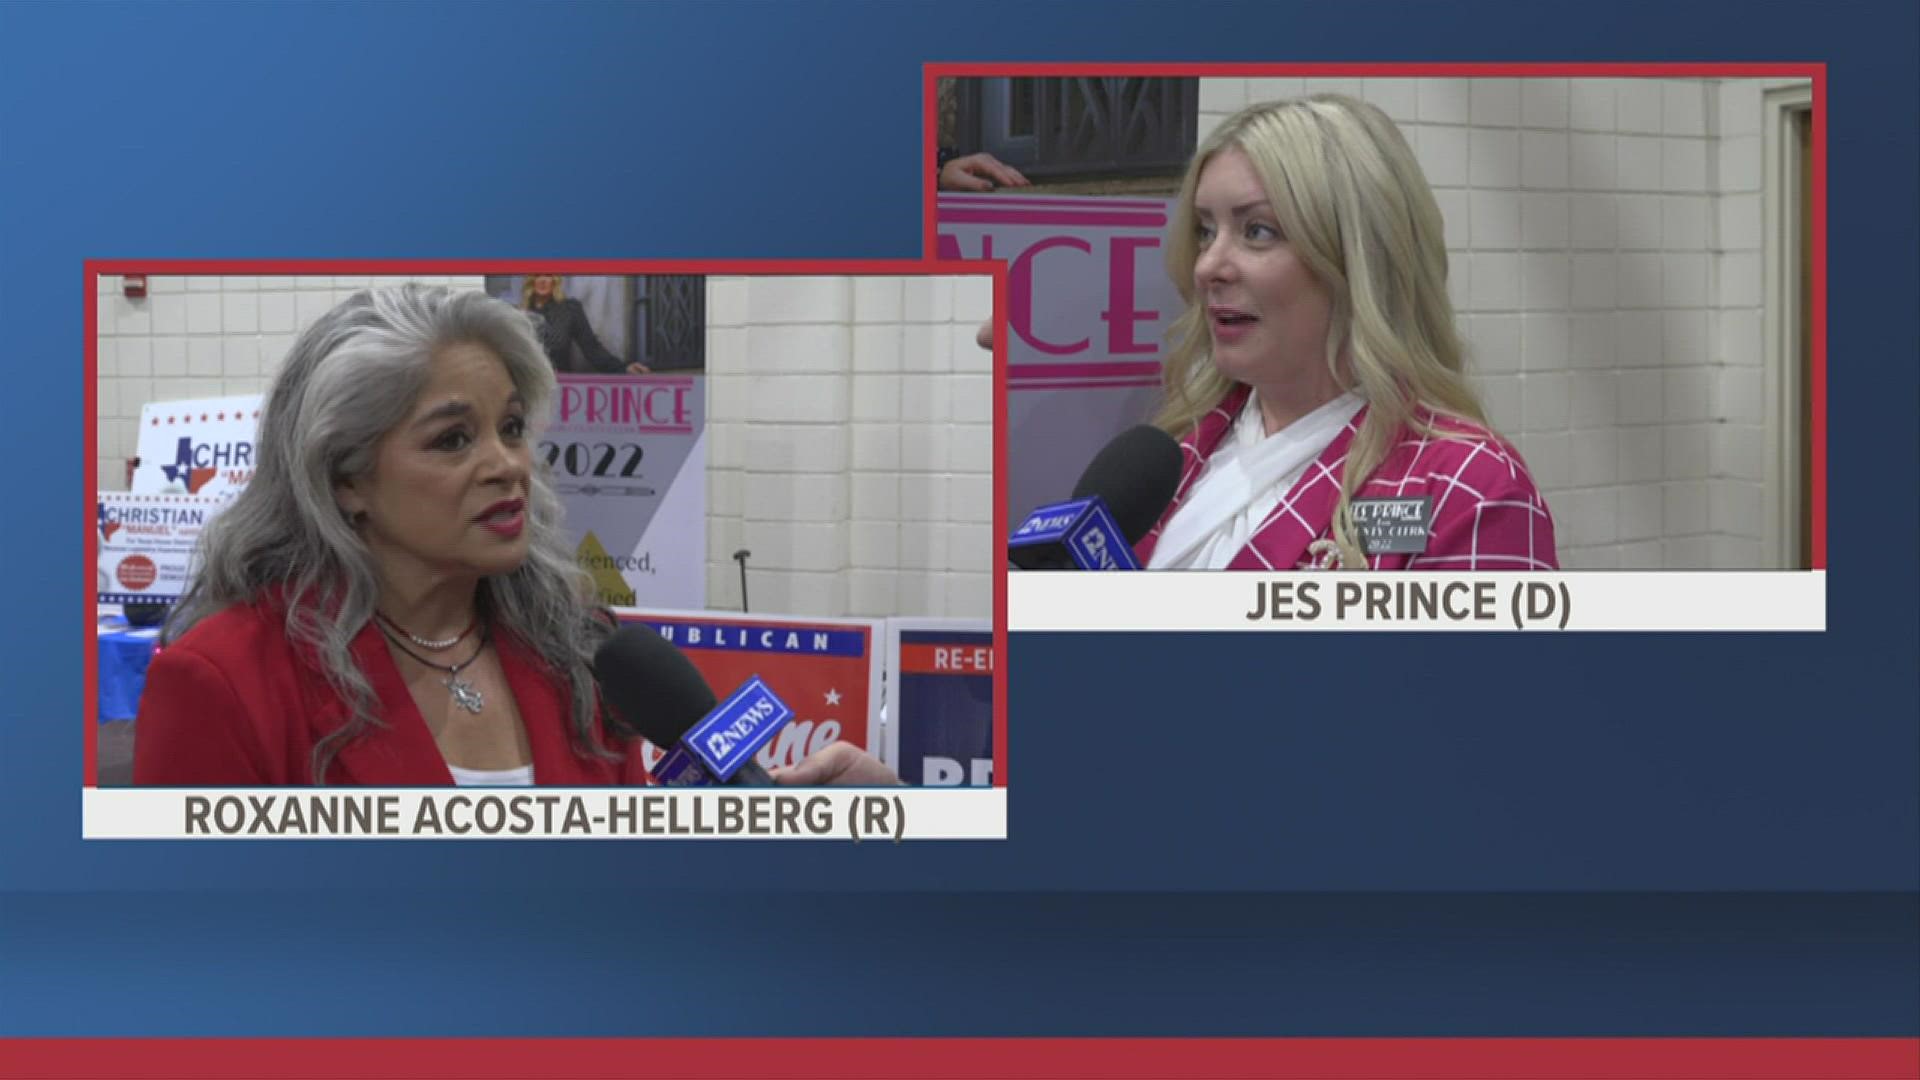 Republican candidate Roxanne Acosta-Hellberg and Democrat candidate Jes Prince are facing off for the seat.